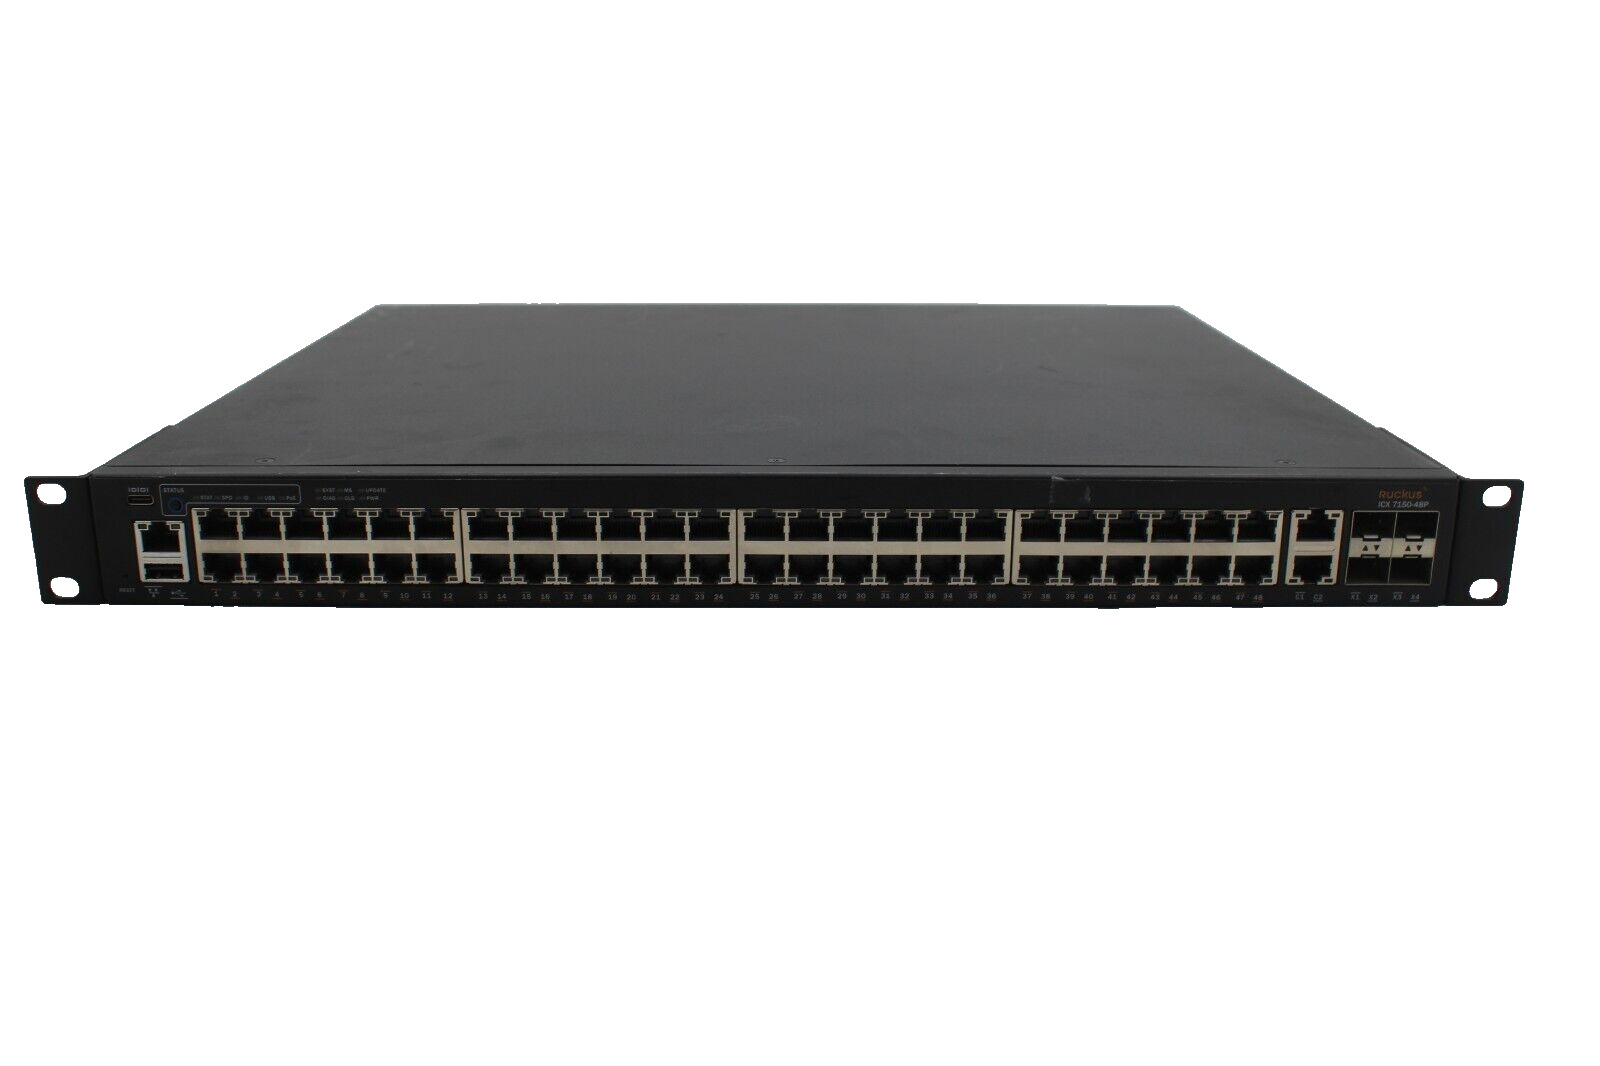 Ruckus ICX7150-48P-2X10G 48-Port PoE+ Managed Network Switch TESTED